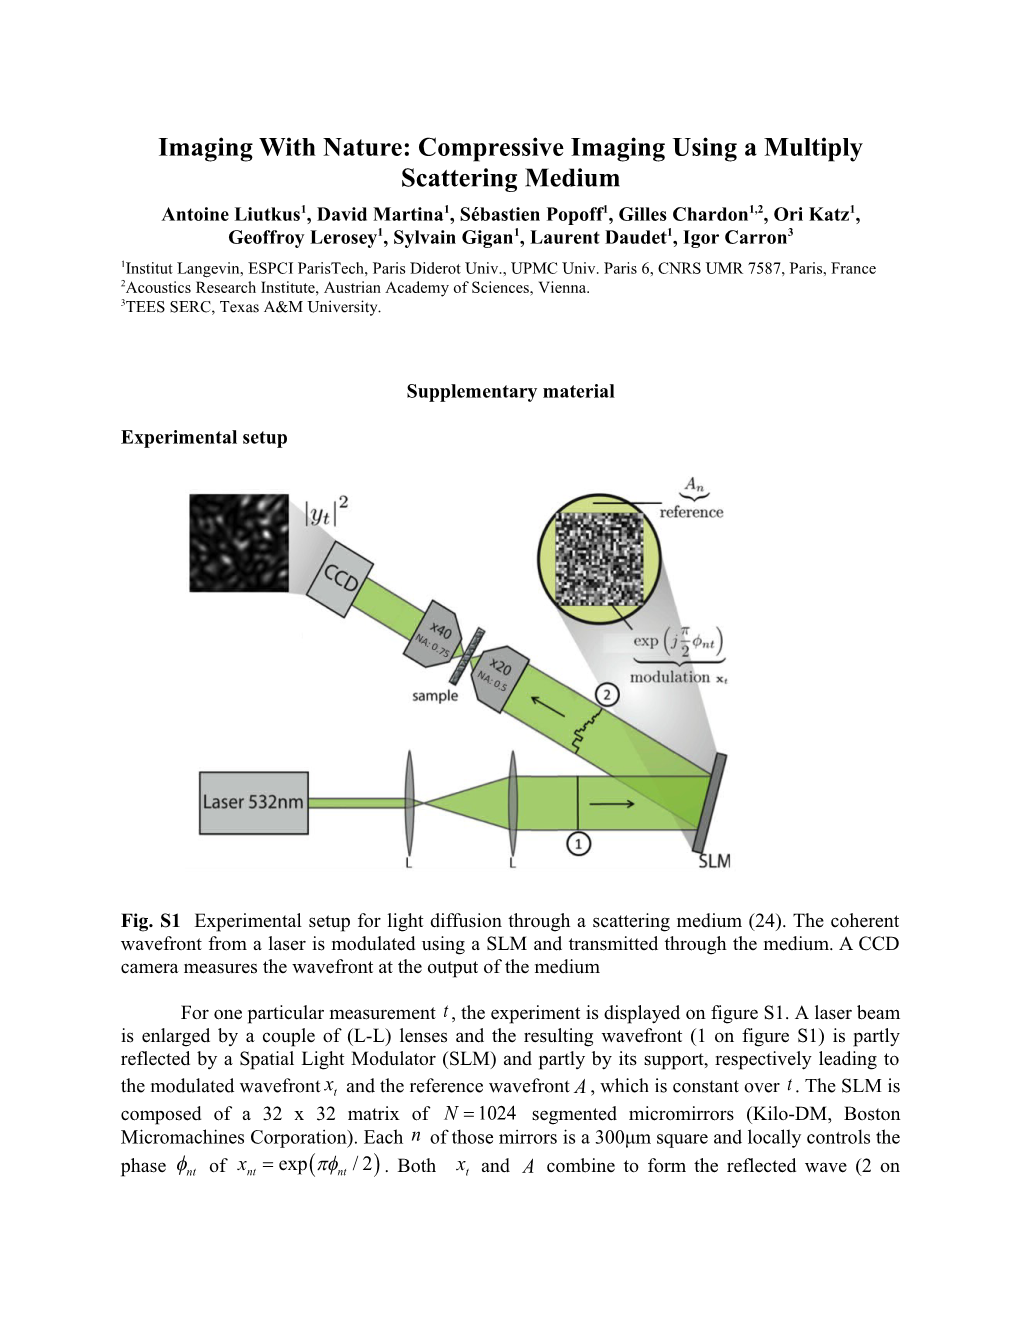 Imaging with Nature: Compressive Imaging Using a Multiply Scattering Medium